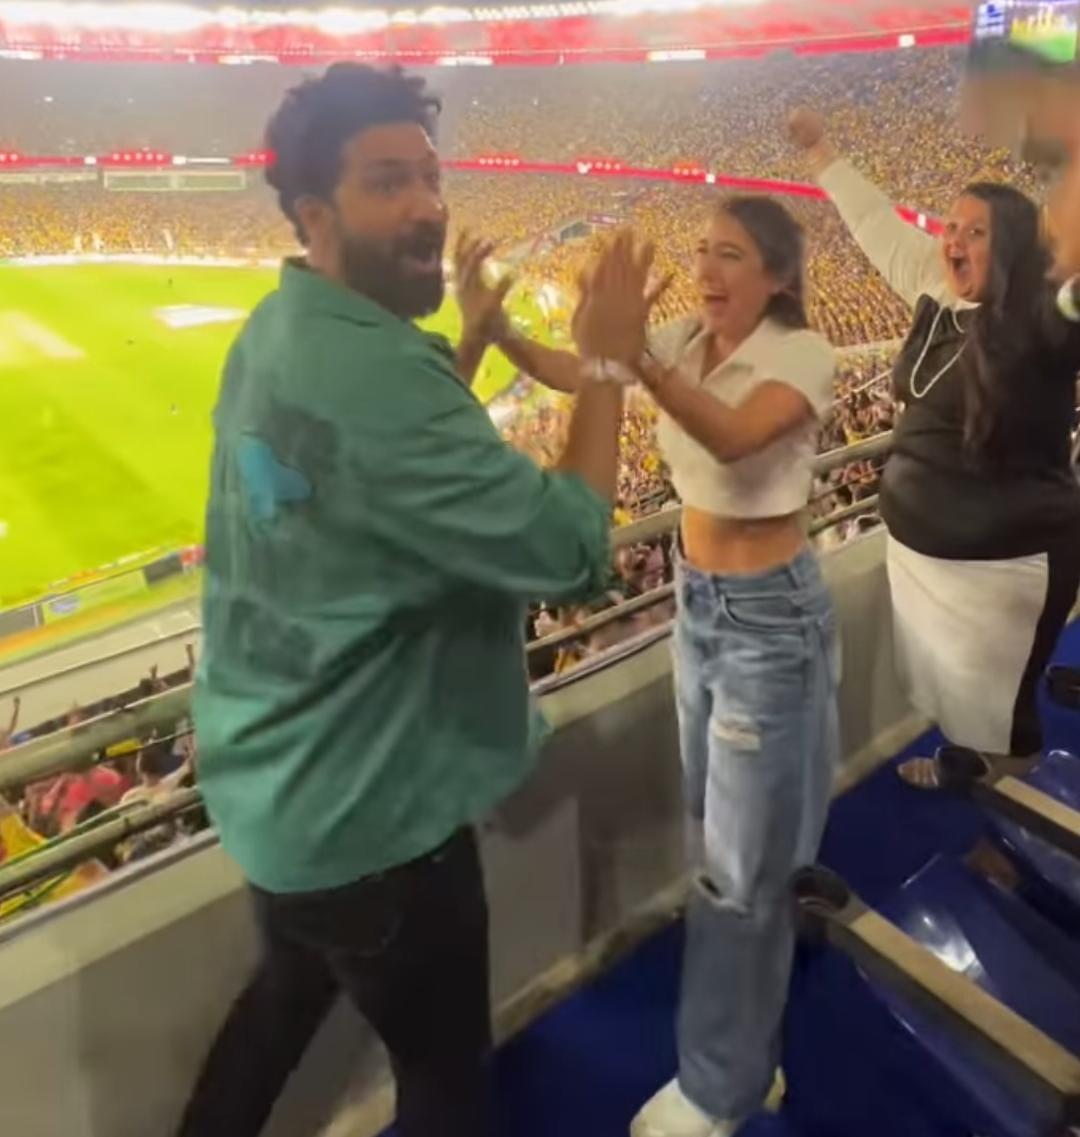 Video: Were Vicky Kaushal and Sara Ali Khan ‘overacting’ as they celebrate CSK’s IPL win? At least netizens think so